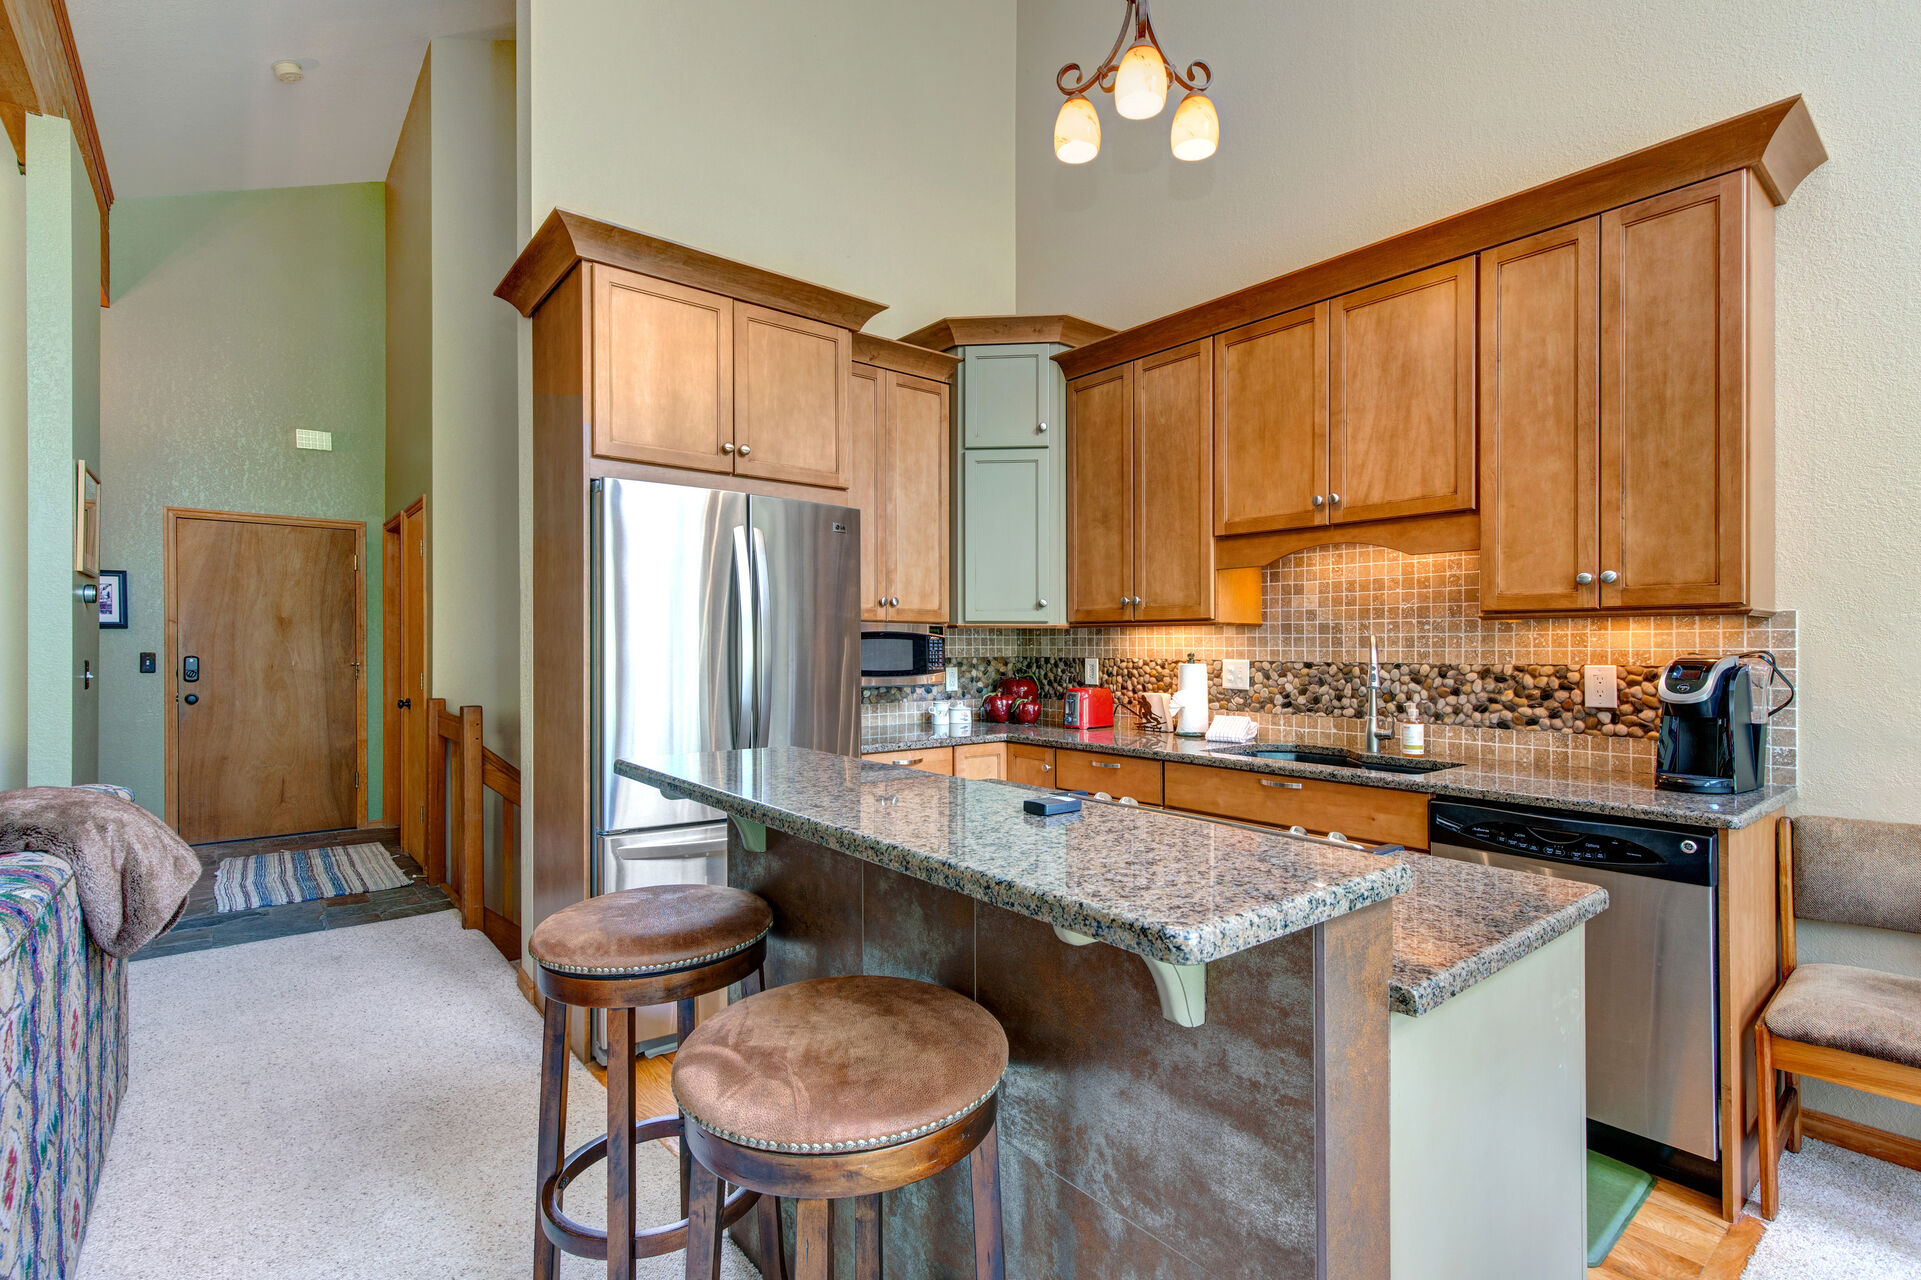 Fully Equipped Kitchen with stone countertops, separate cooking island, stainless steel appliances, and bar seating for two